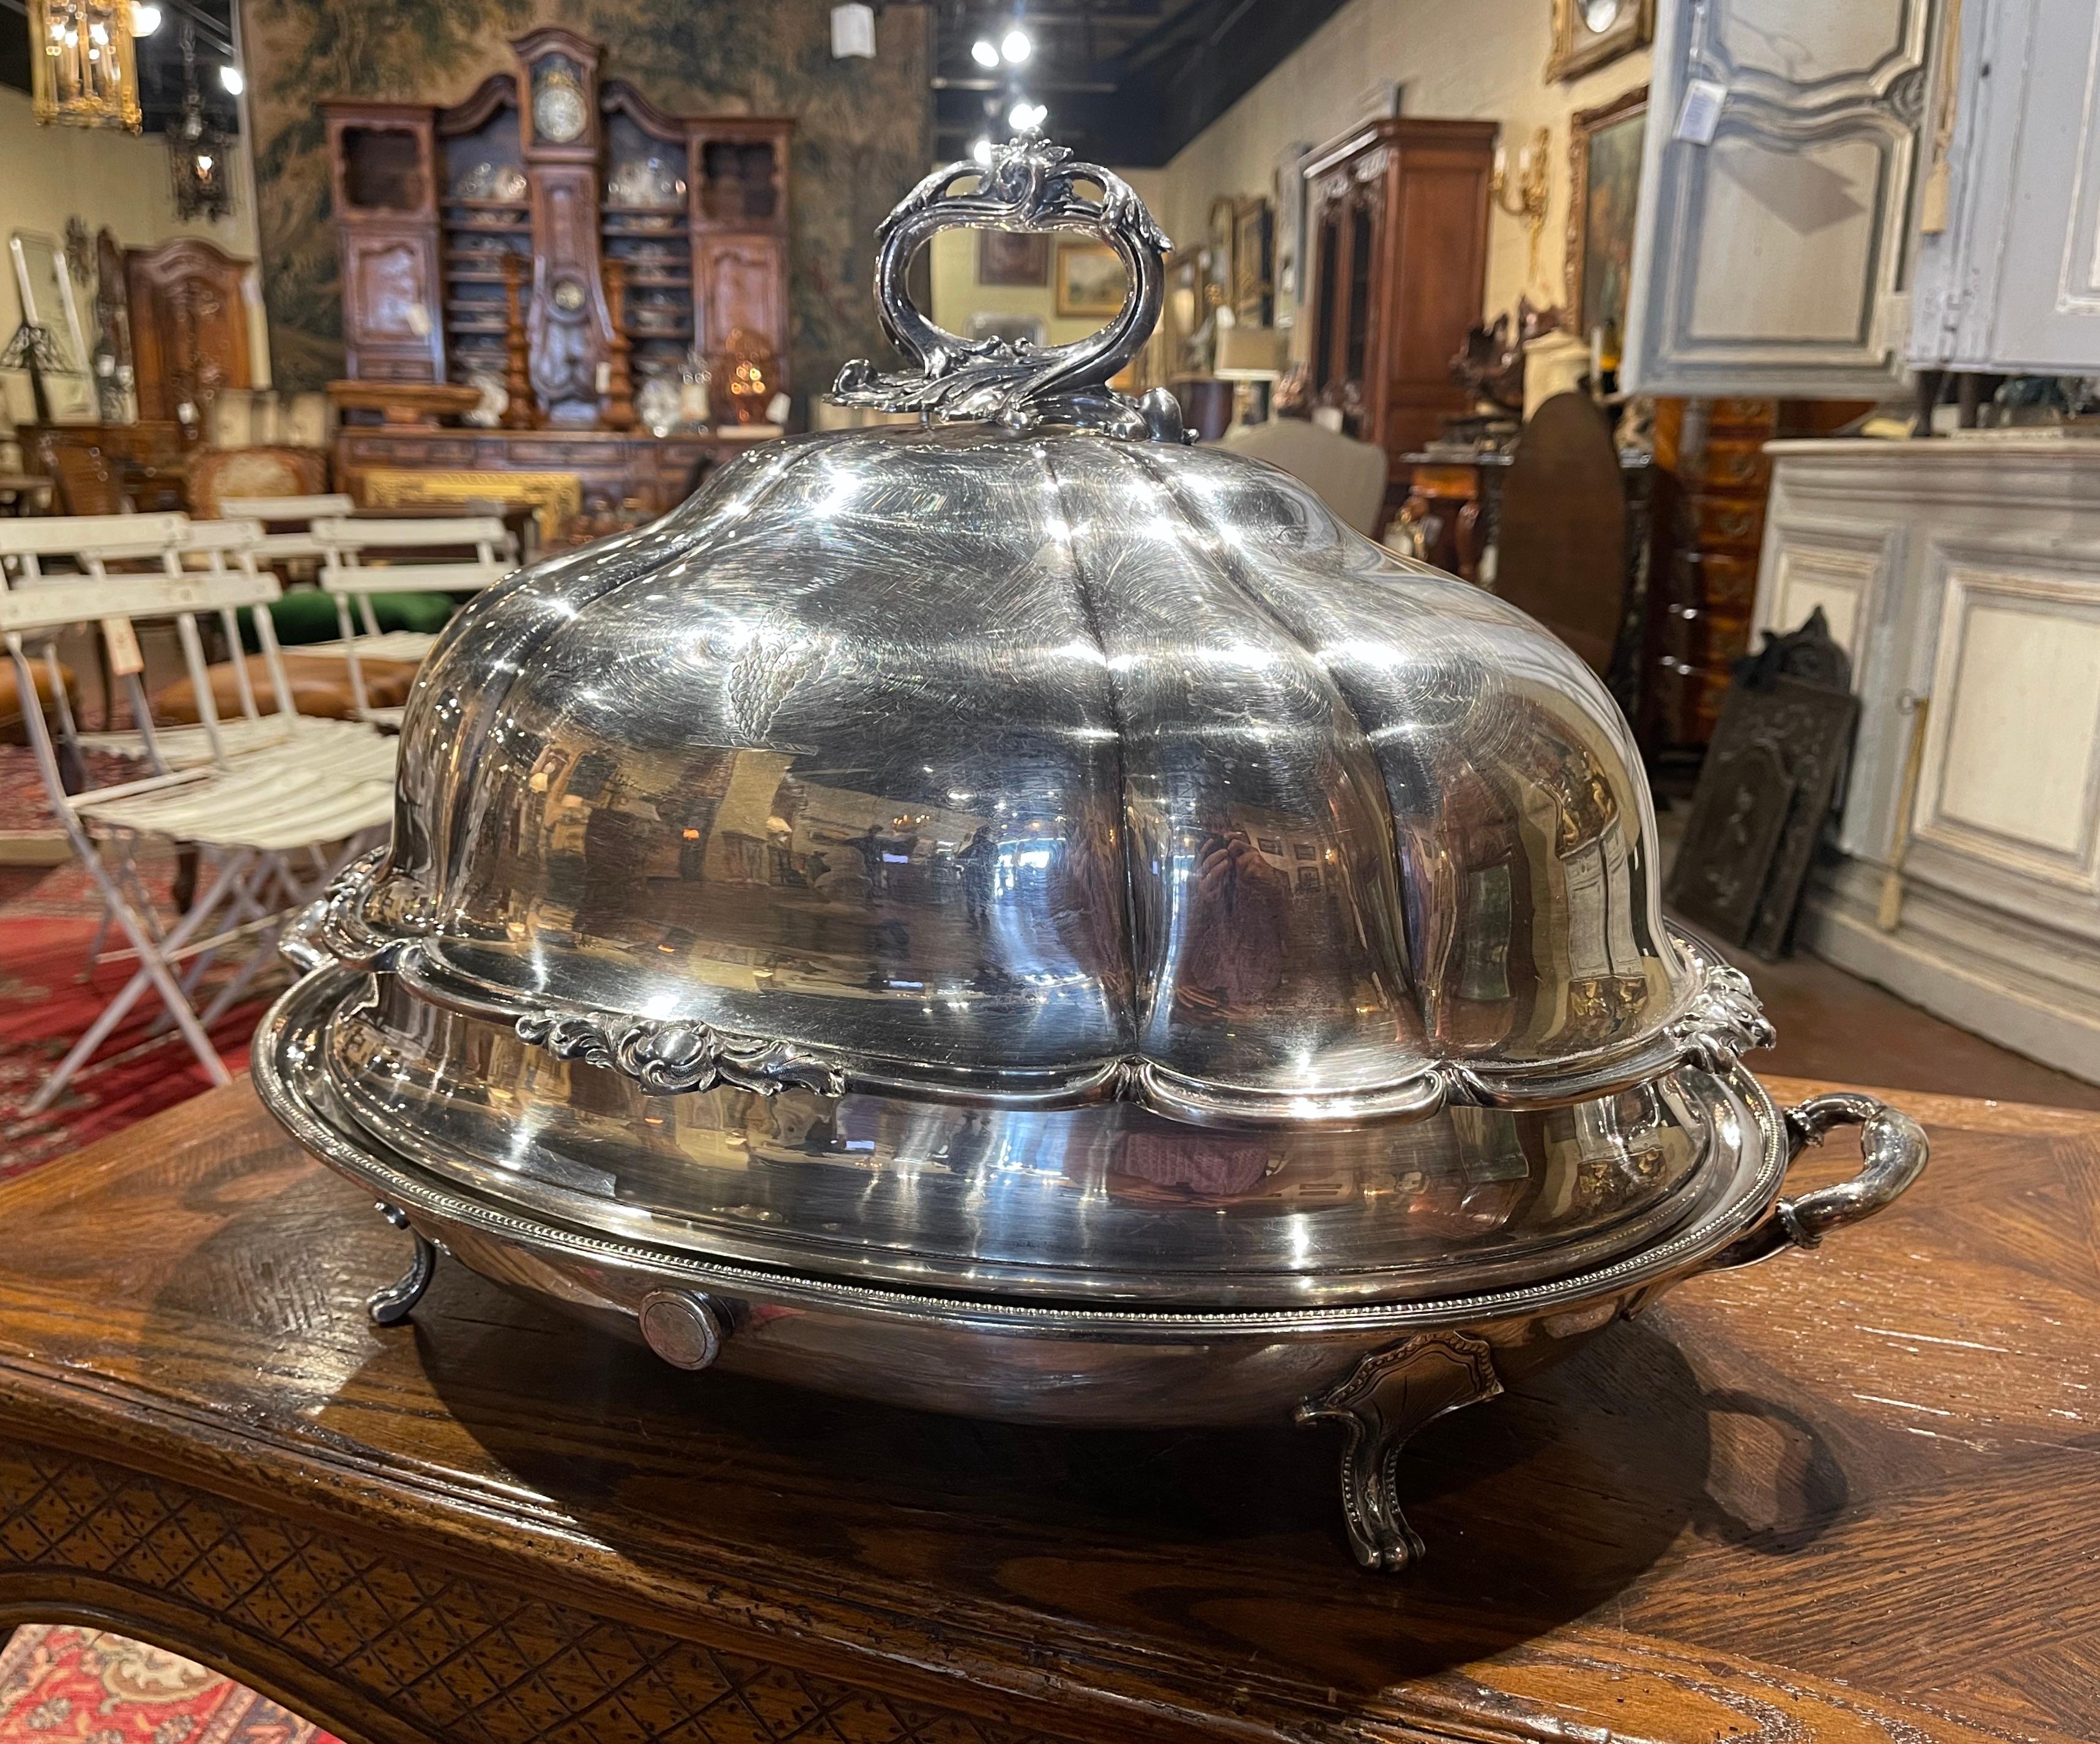 This elegant two-piece antique copper well tree with warming jacket, with meat cover dome was created in England, circa 1860. Likely manufactured by Sheffield, and standing on curved legs, the platter with integral warming jacket, is dressed with